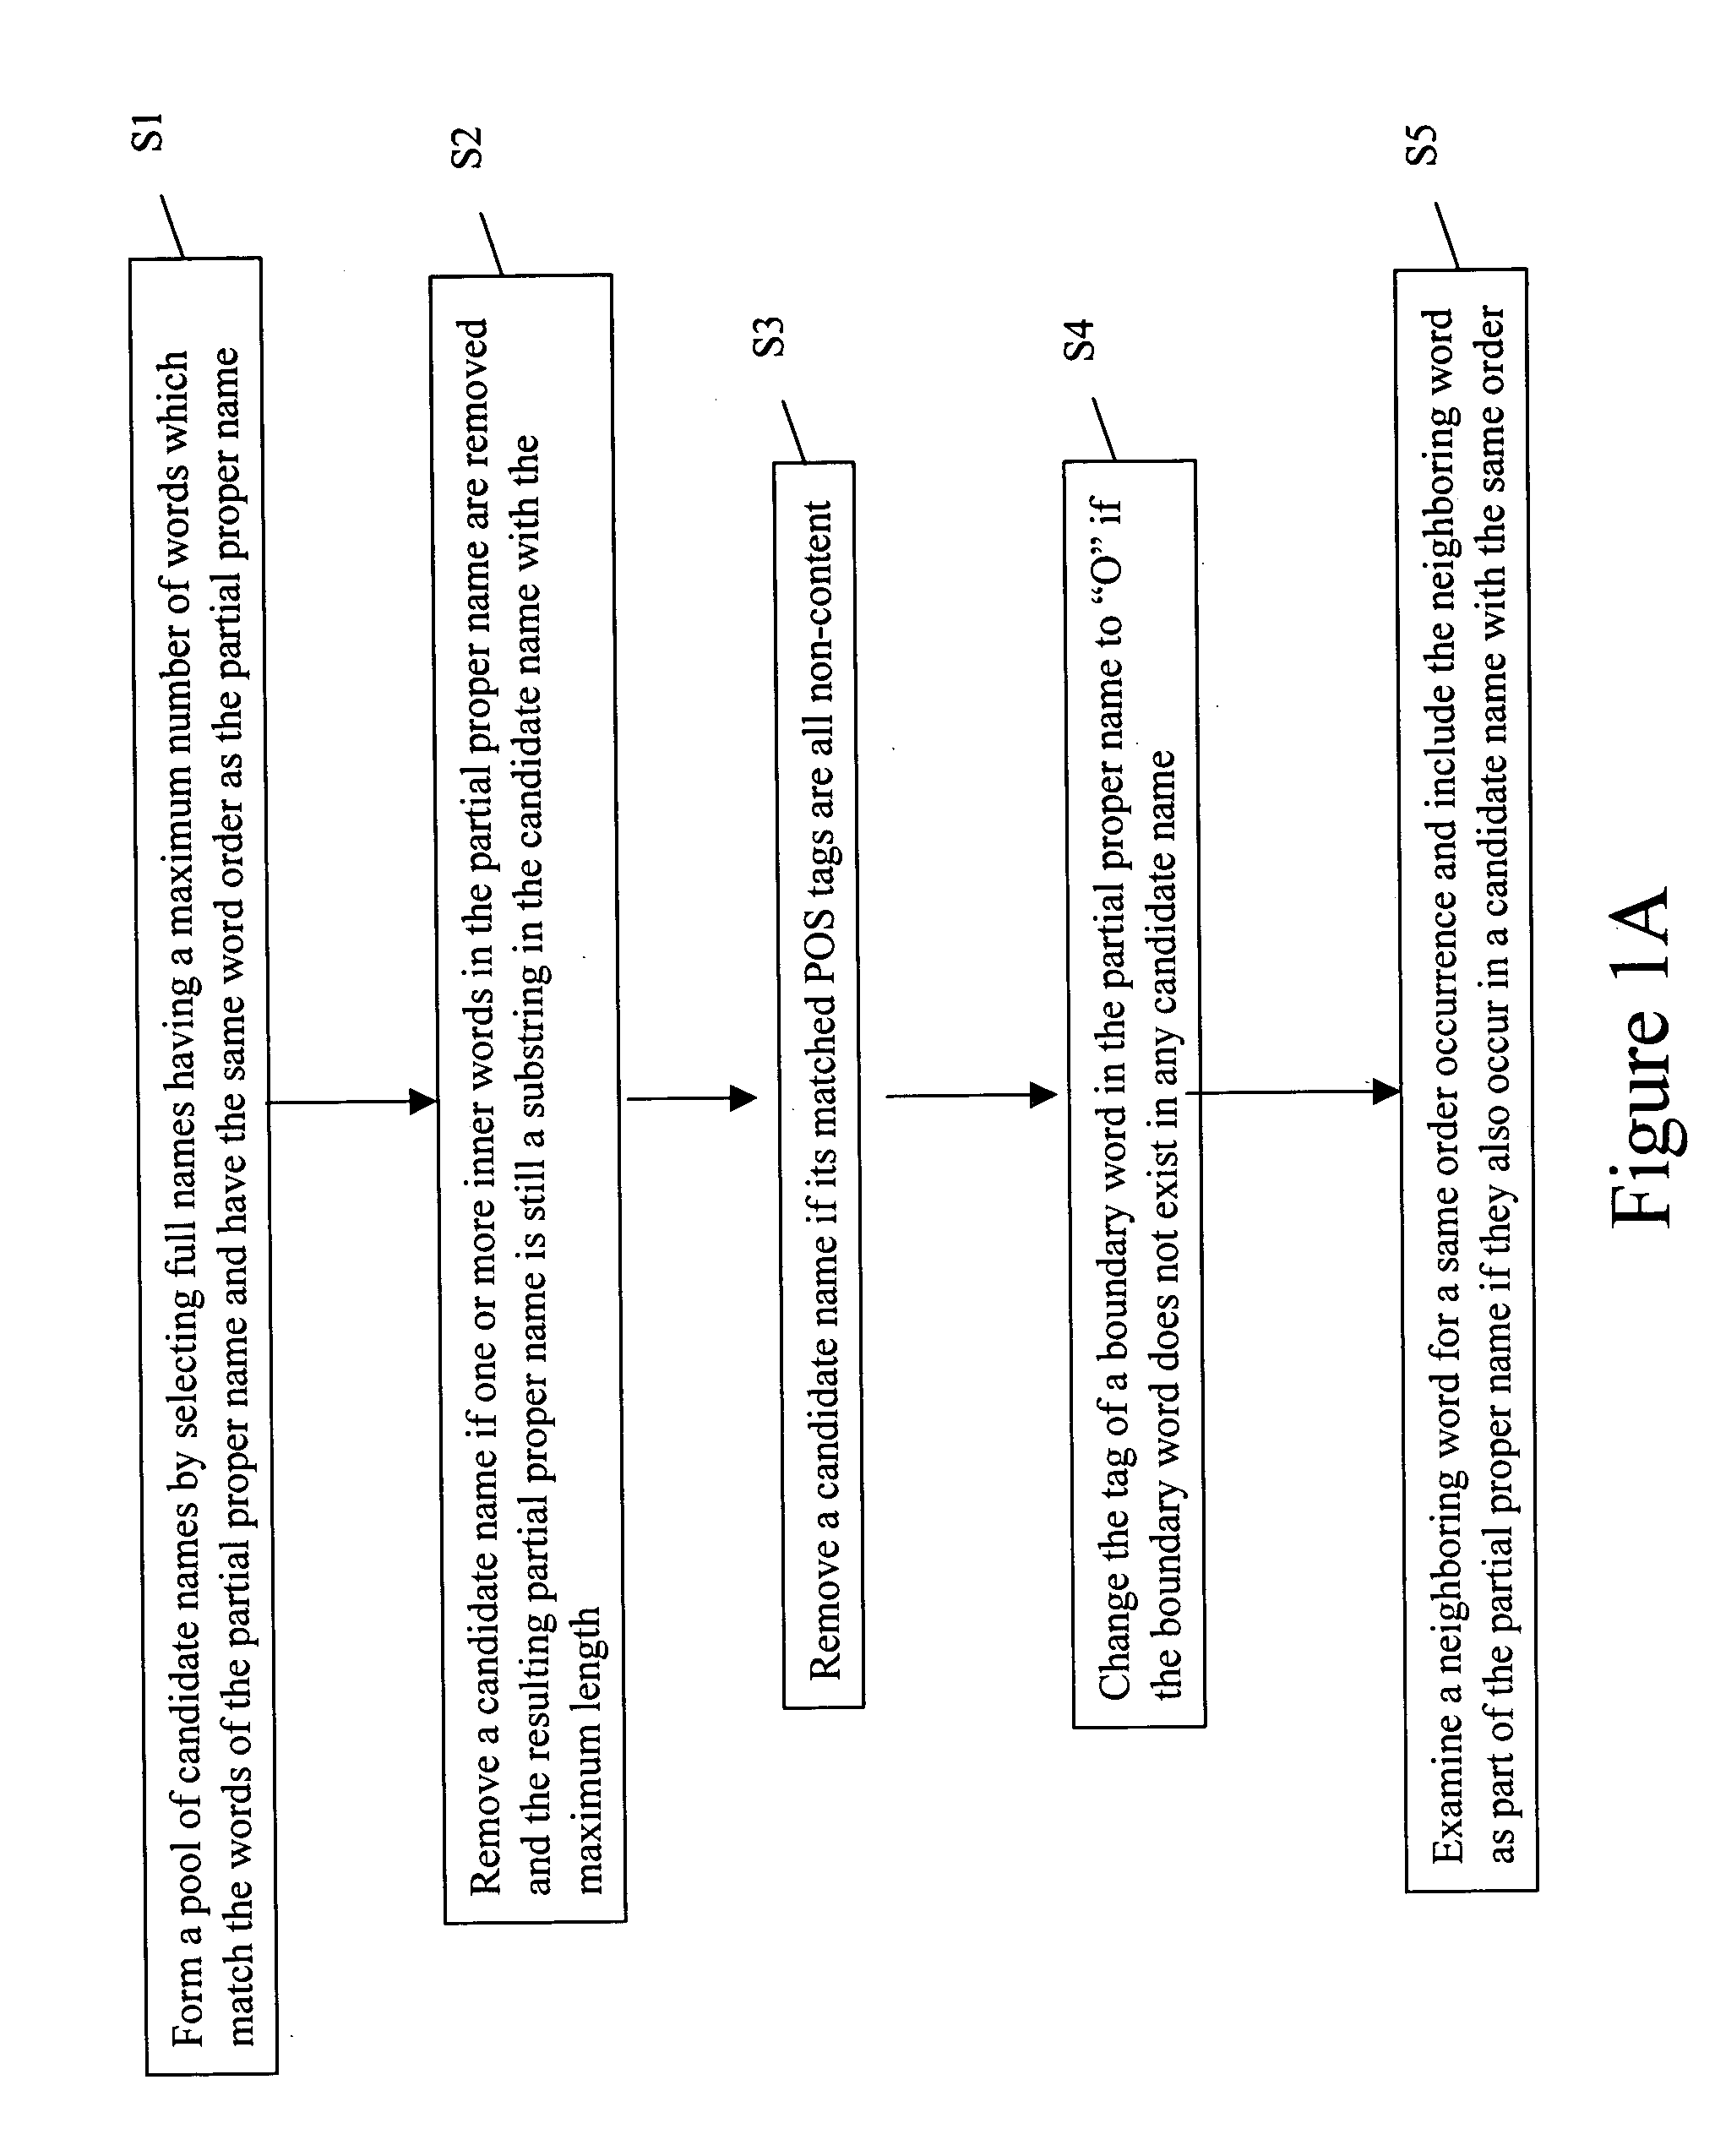 Method and apparatus for providing proper or partial proper name recognition